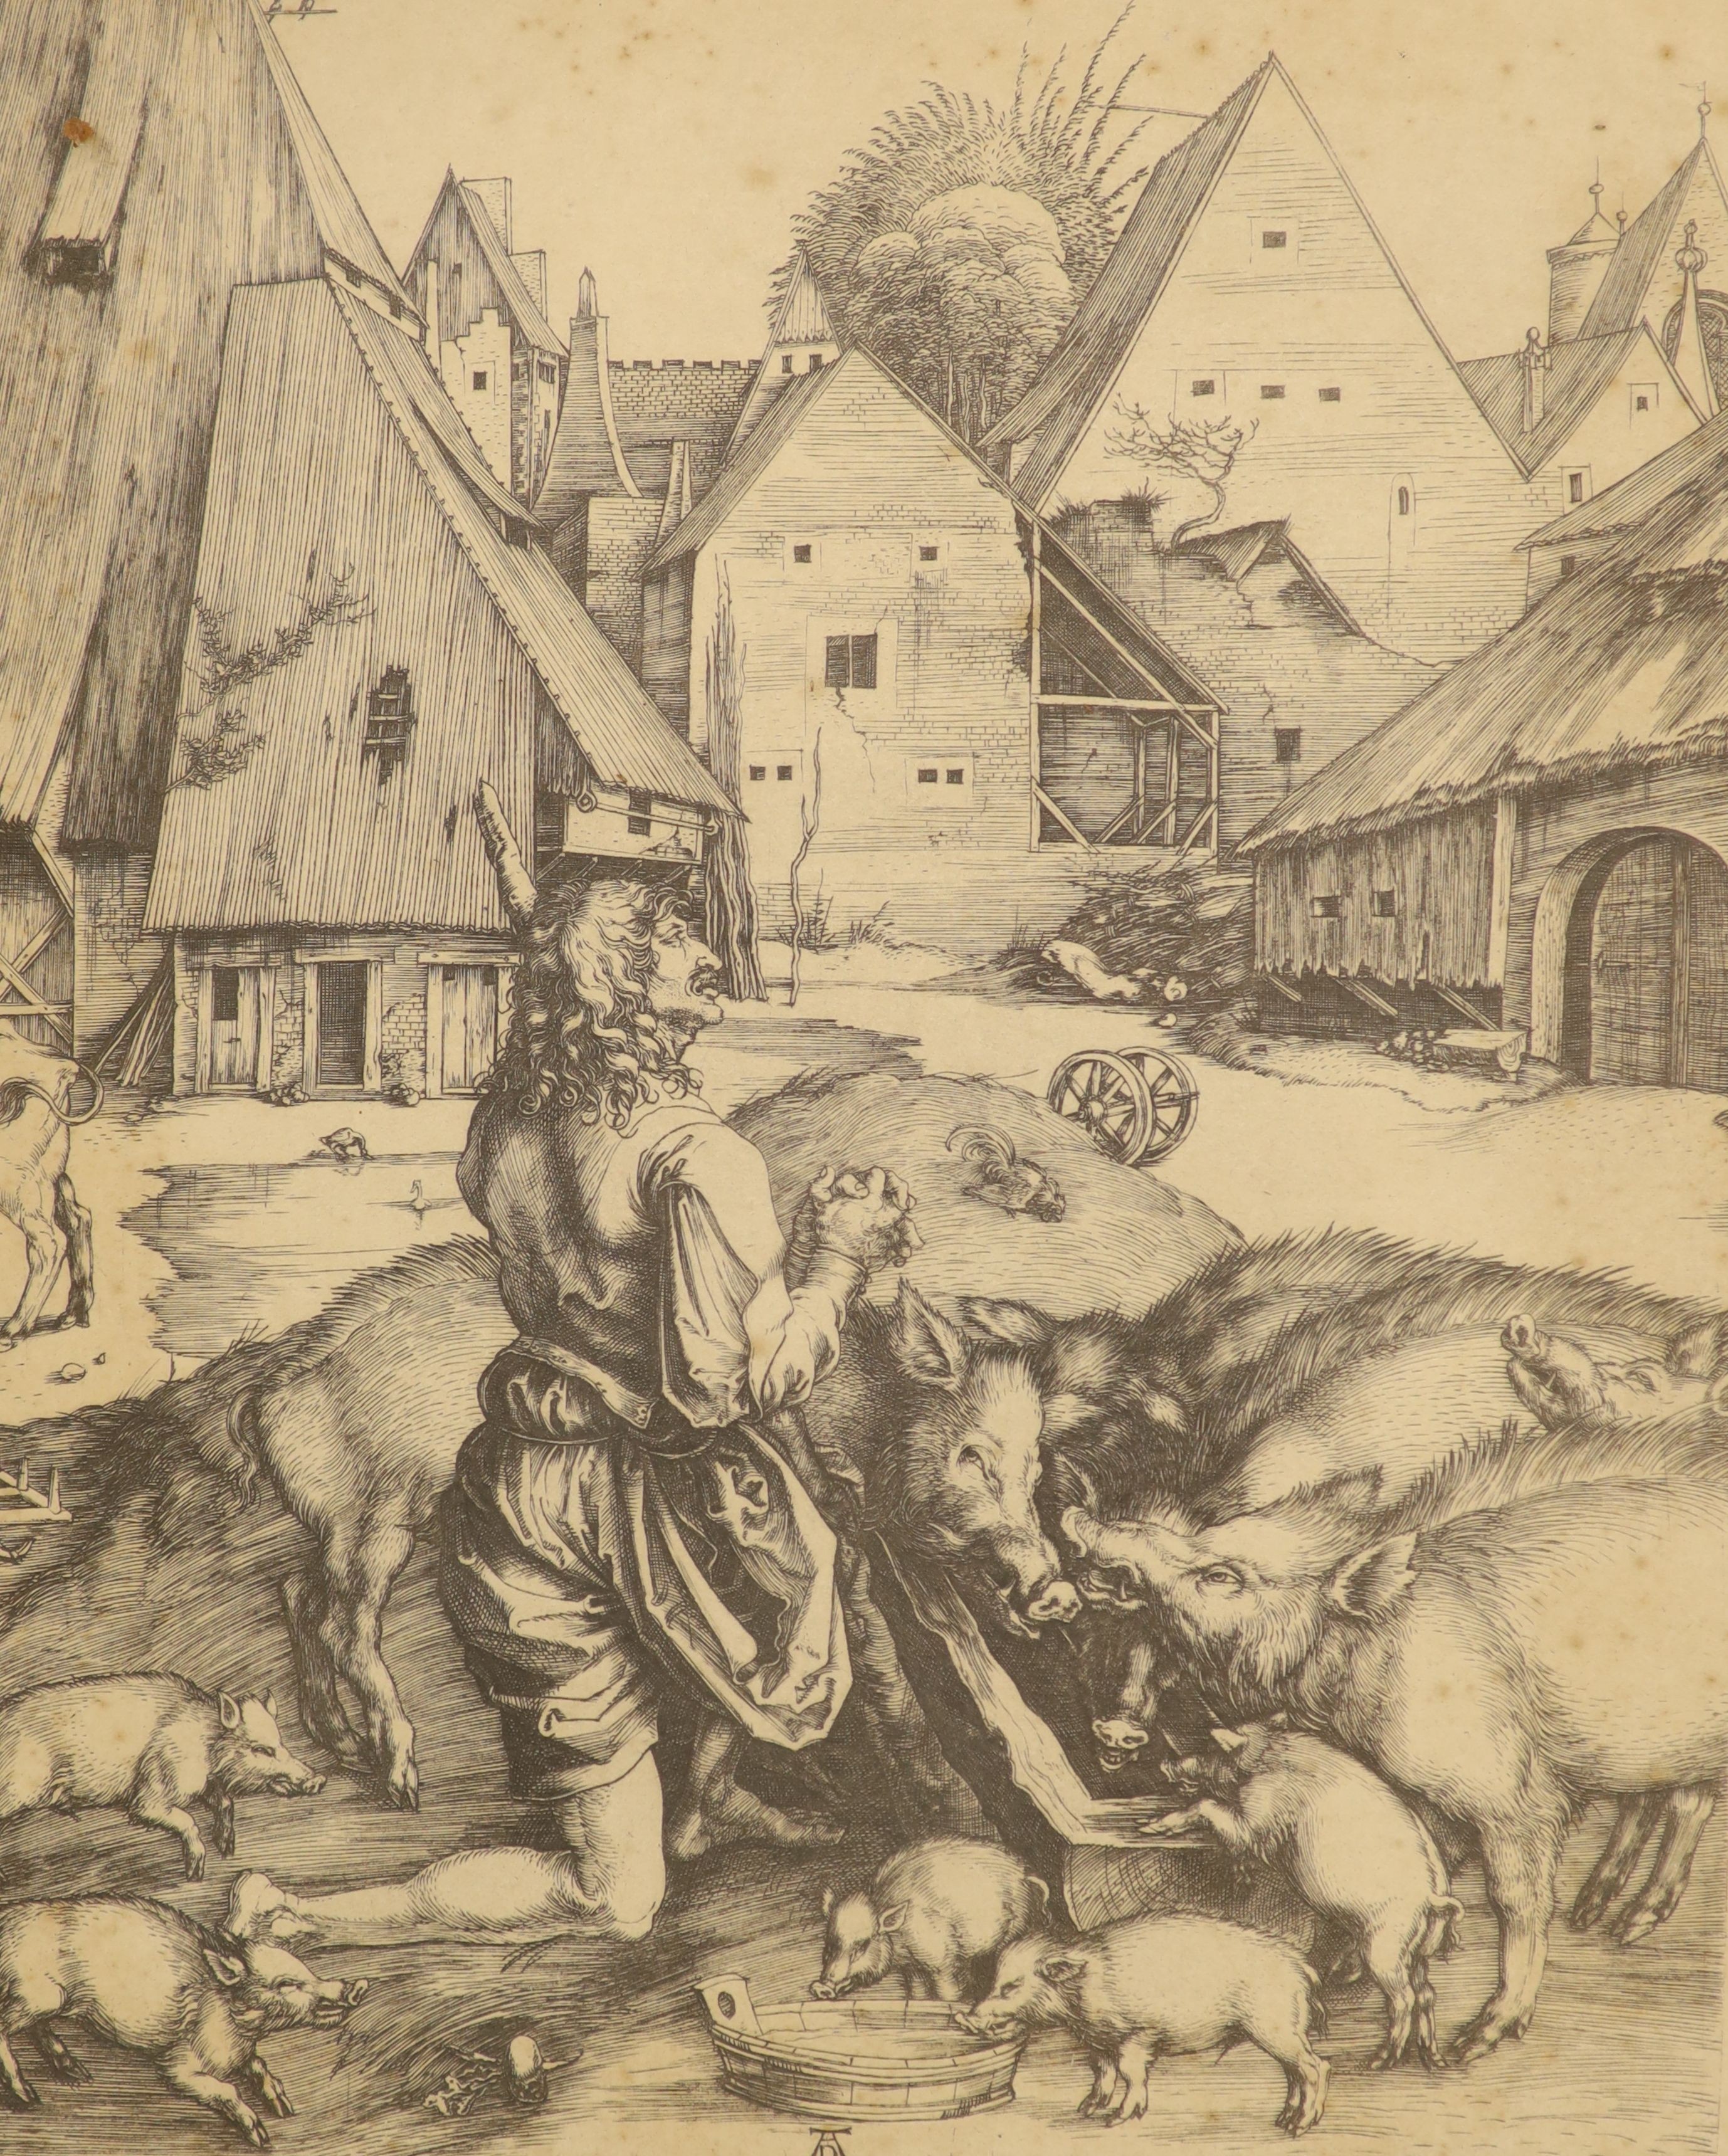 After Albrecht Durer, two photolithographs, 'The Prodigal Son' and 'Saint Eustace', 28 x 22cm and 36 x 27cm